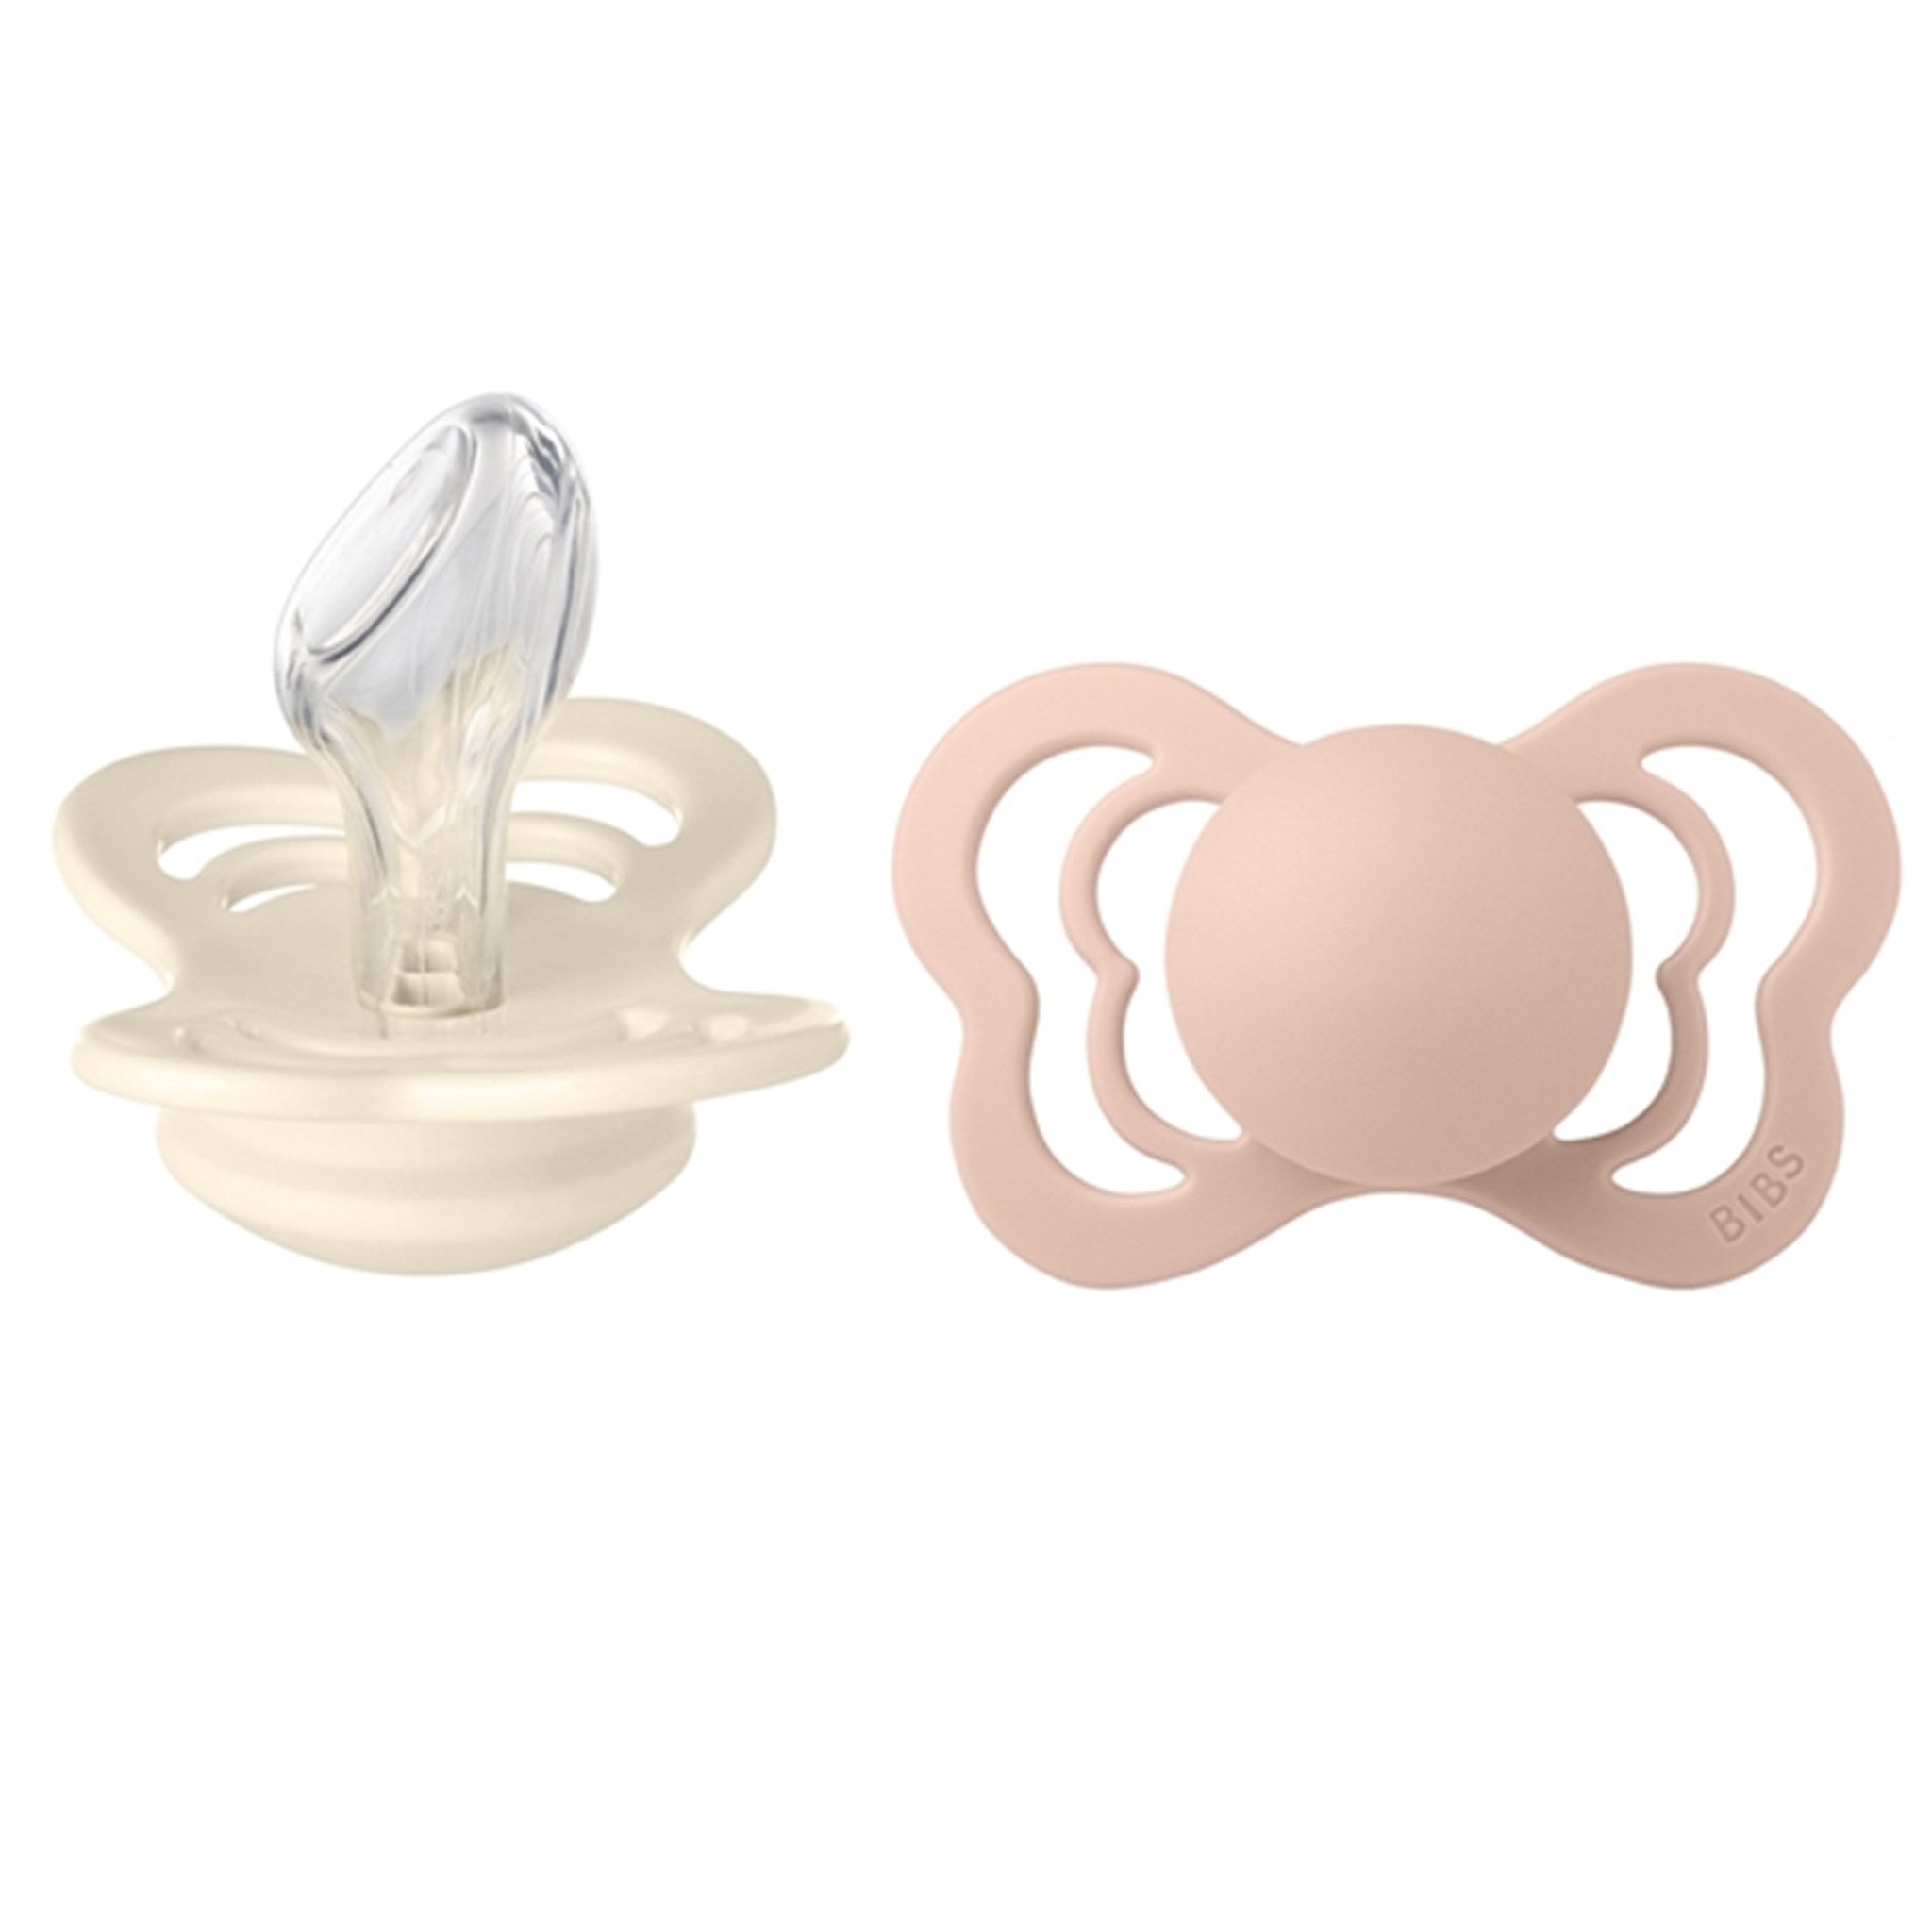 Bibs Couture Silicone Pacifiers 2-pak Anatomical Ivory/Blush